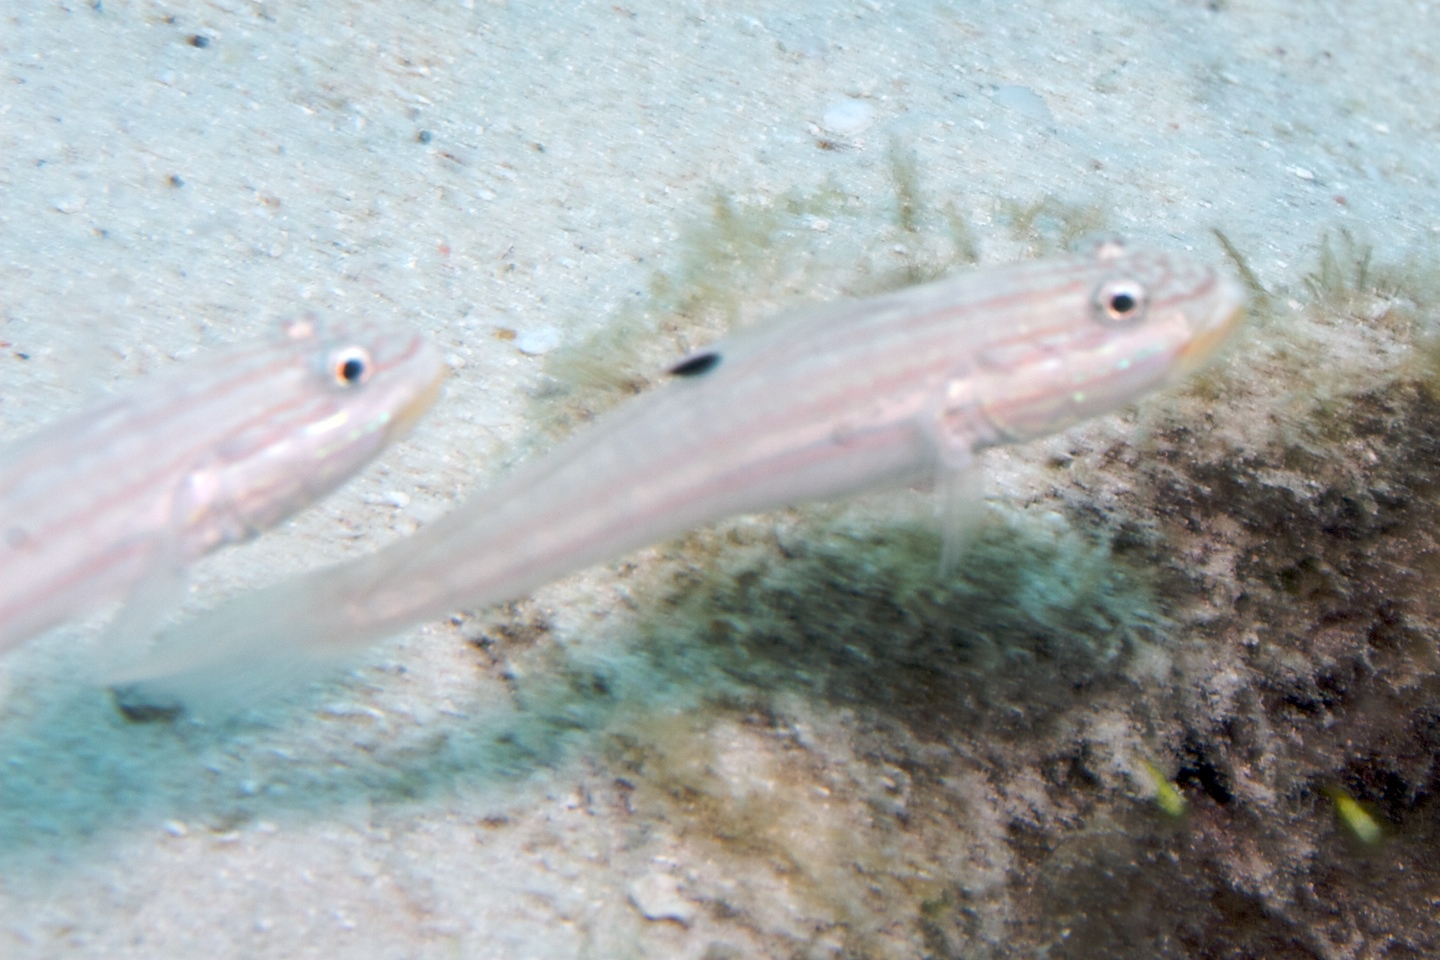 Mural goby